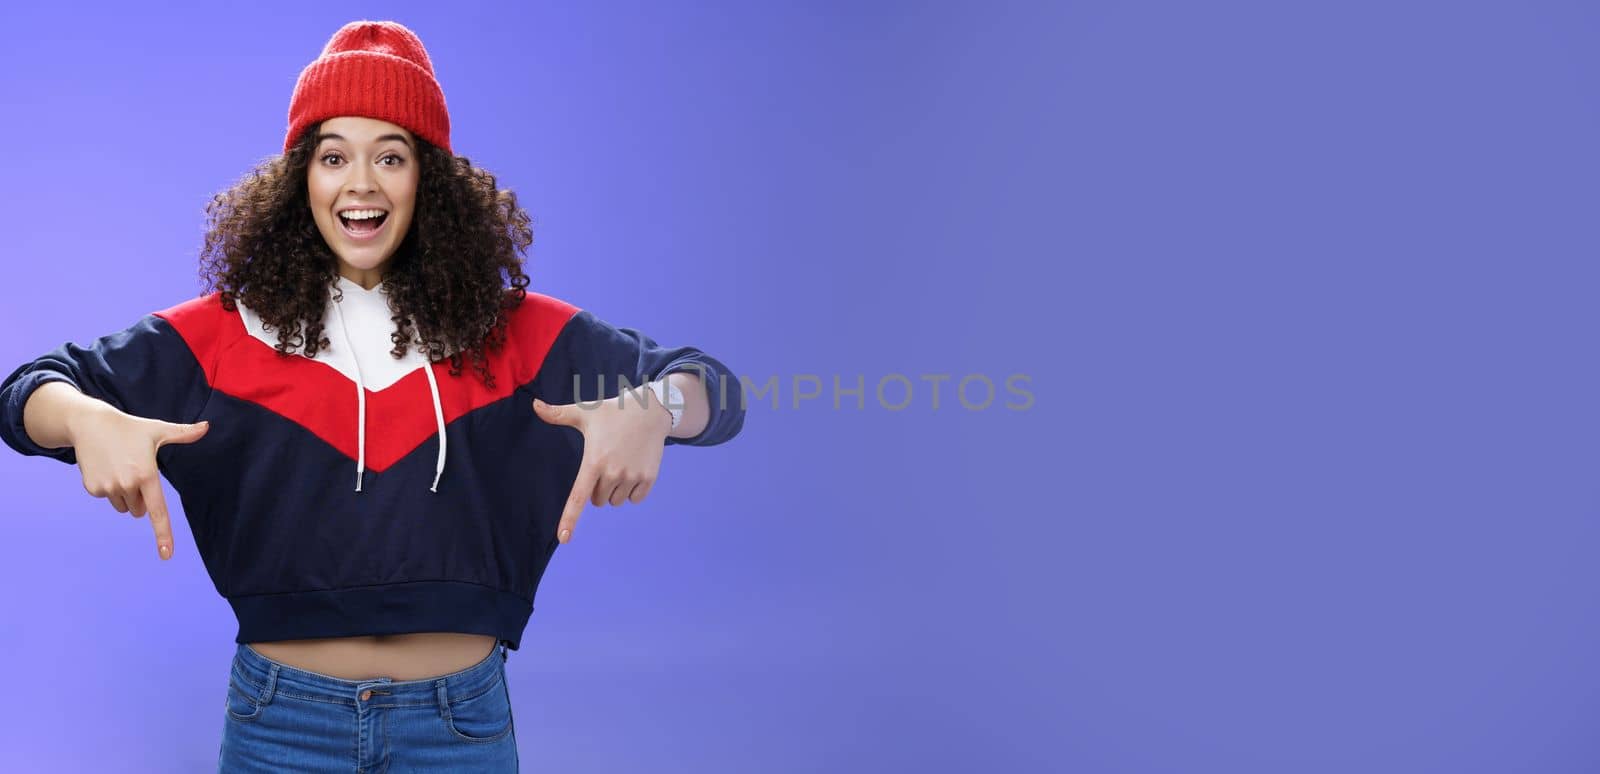 Hurry up and chek it out. Portrait of charismatic joyful and excited young cute curly-haired girl in beanie and stylish outfit pointing down, smiling broadly inviting join fun over blue background by Benzoix